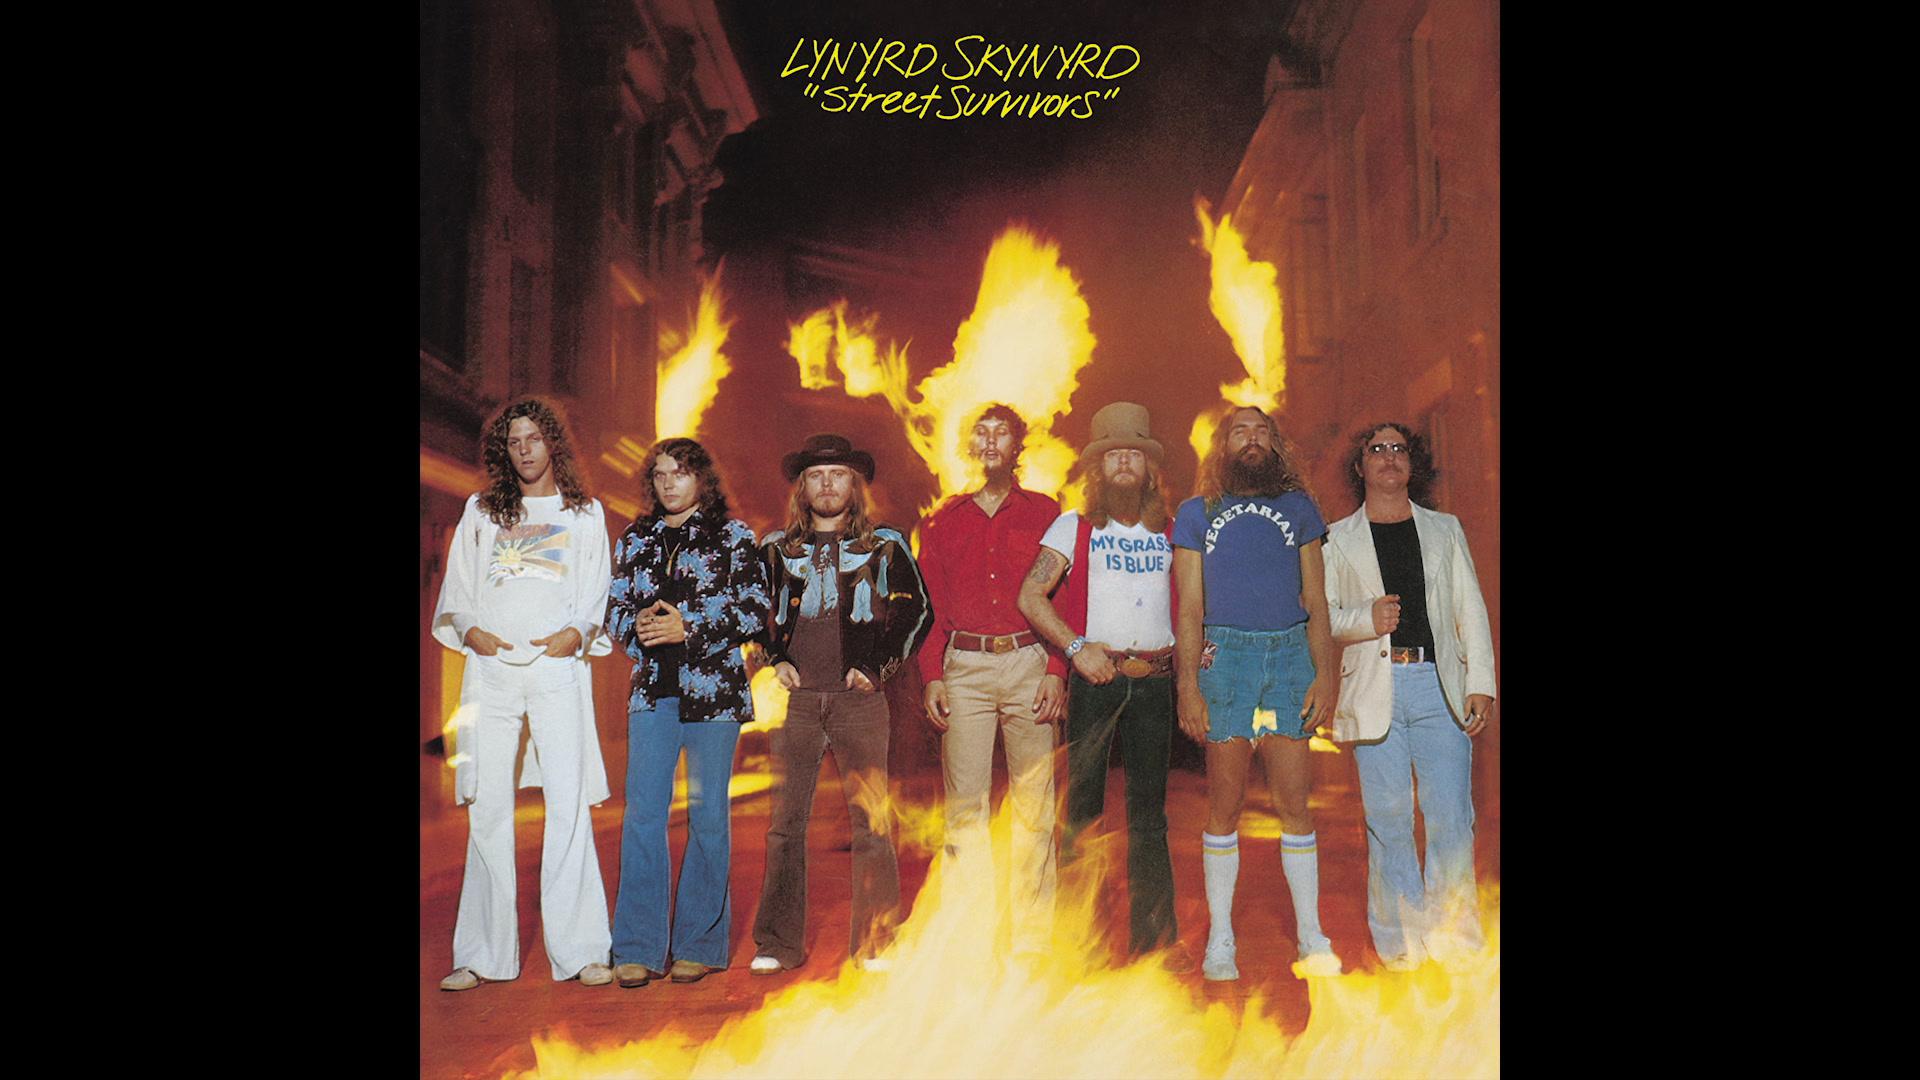 Lynyrd Skynyrd - What's Your Name (Audio)